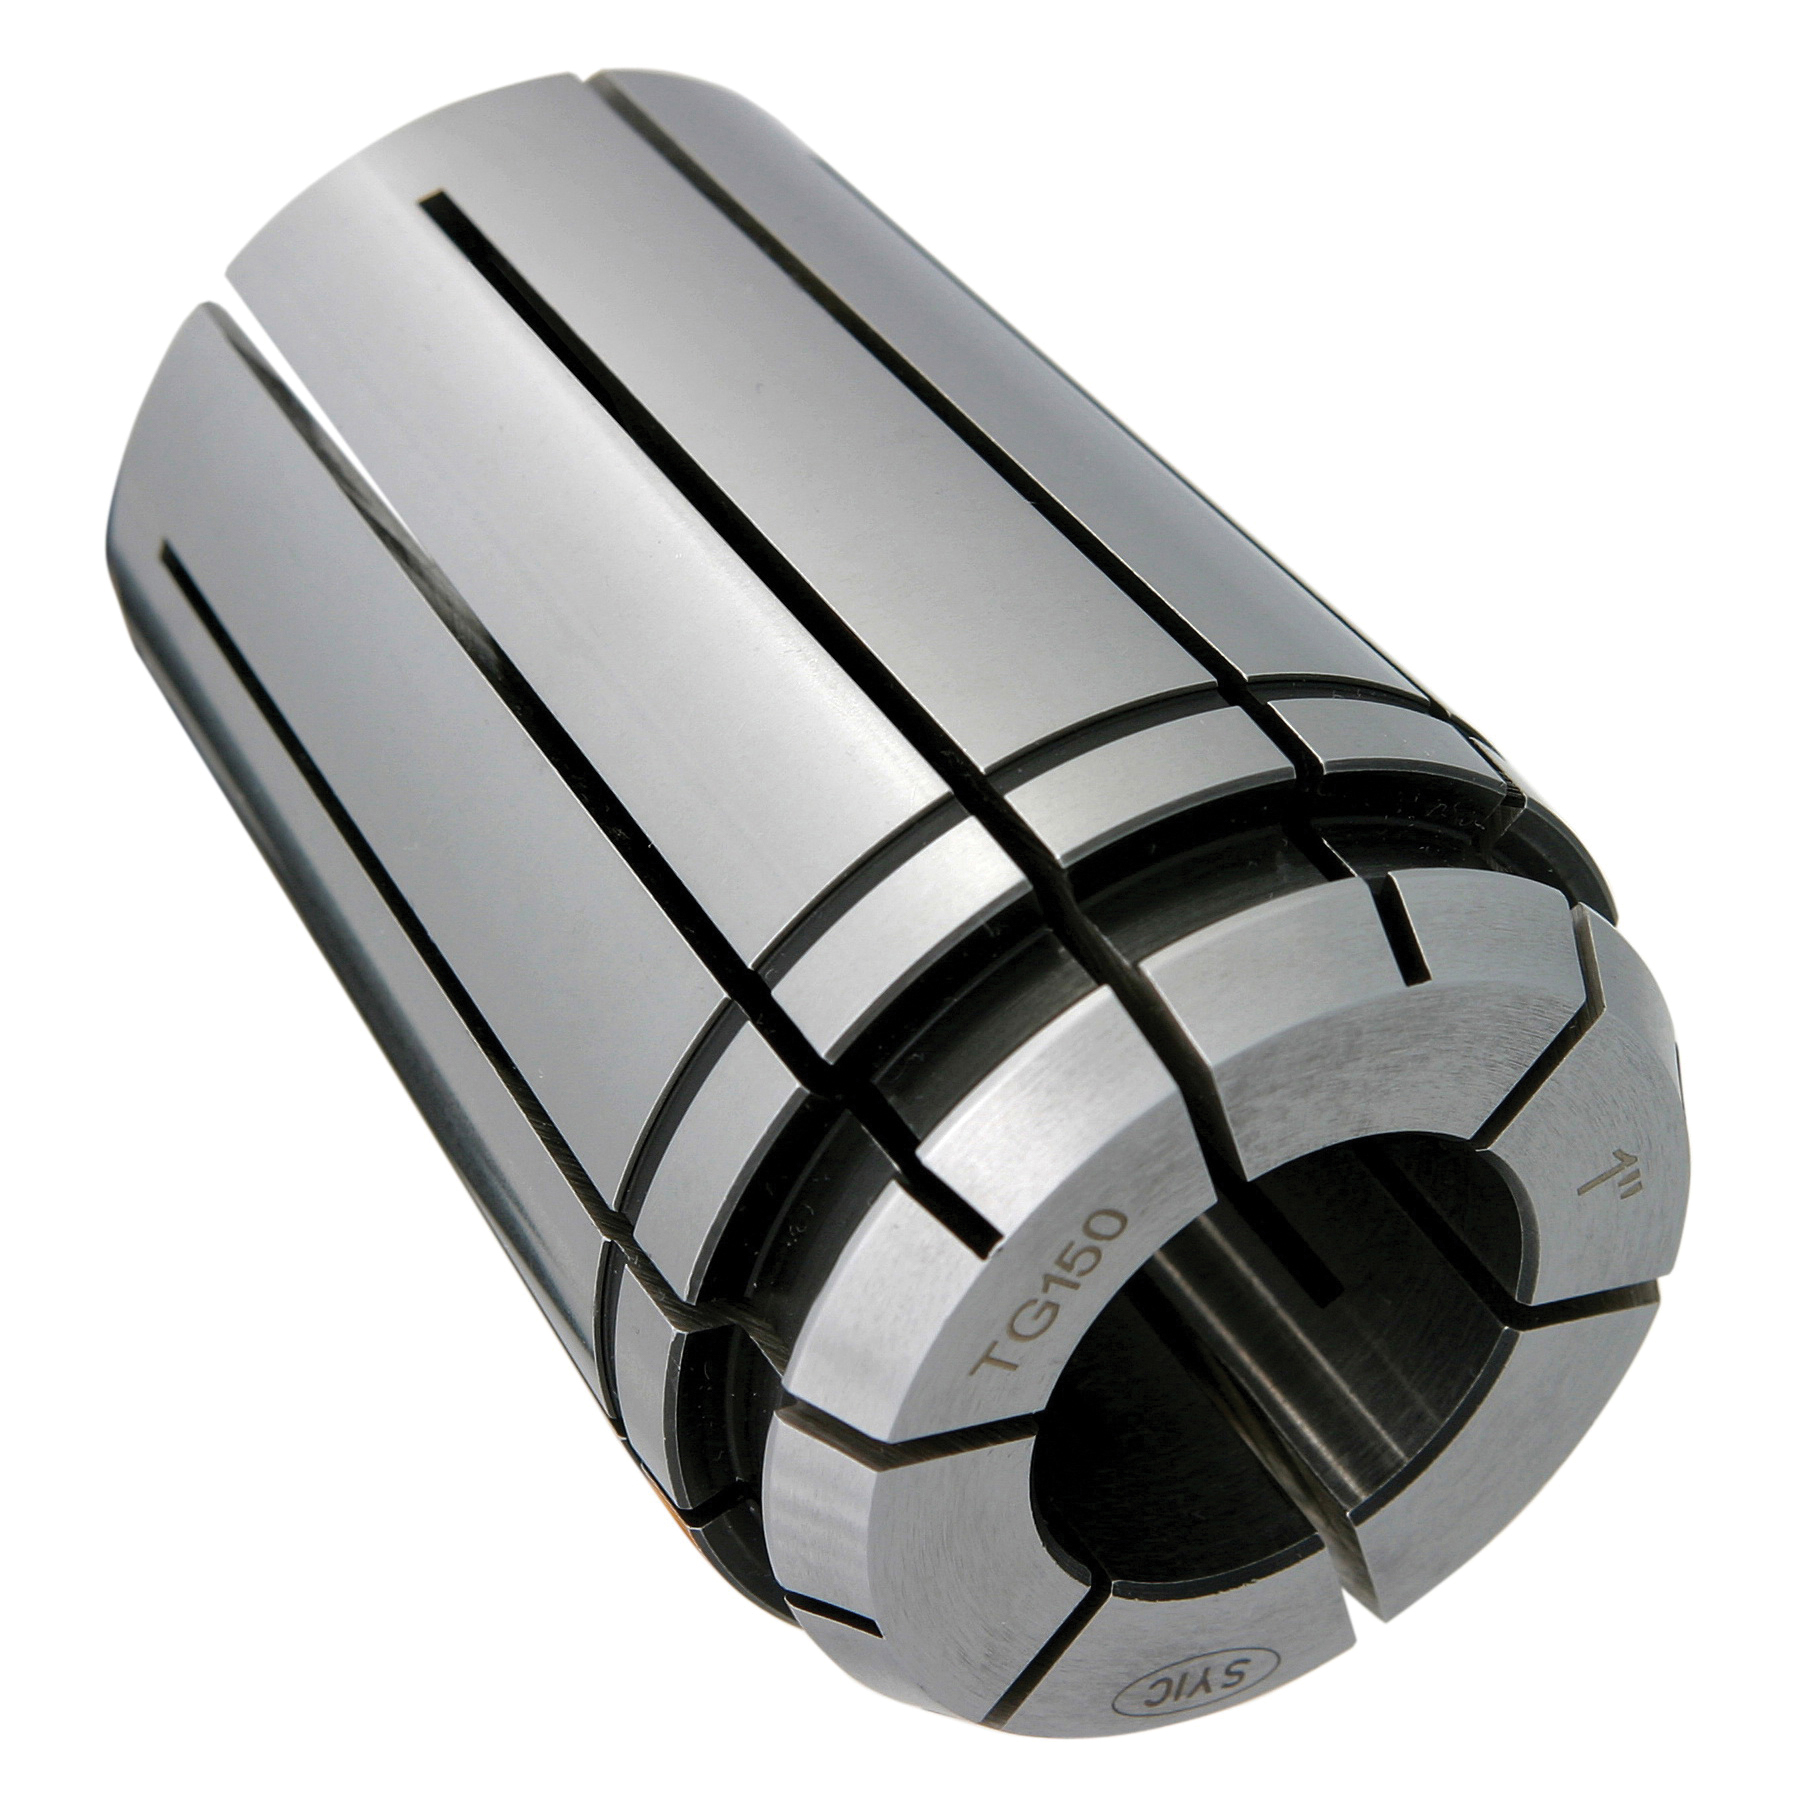 TG150 1-1/32" COLLET